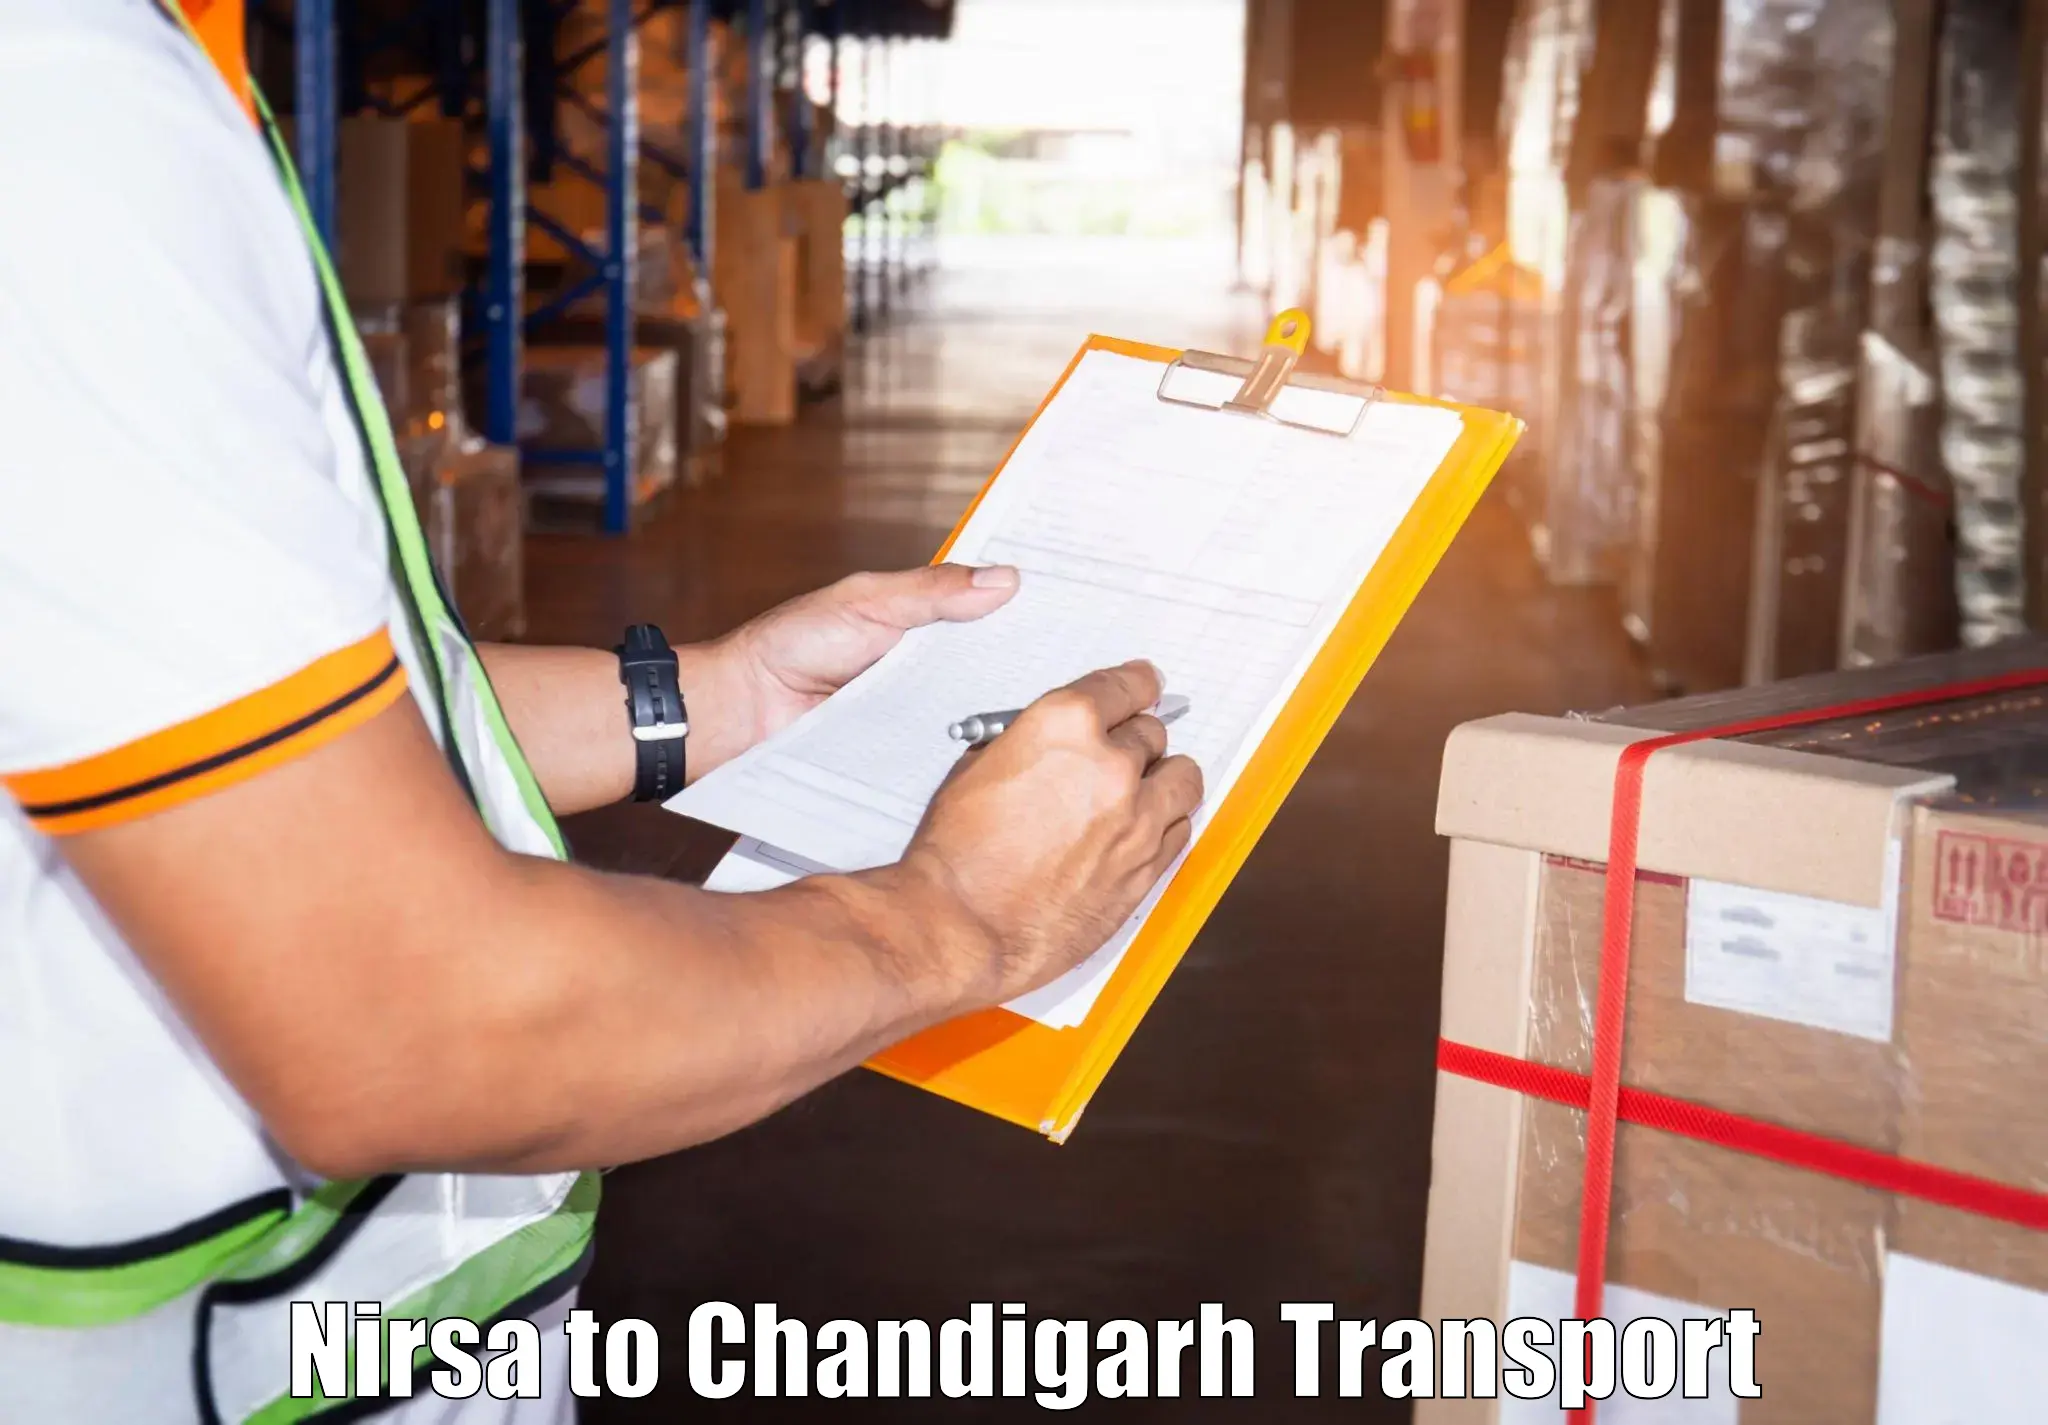 Part load transport service in India Nirsa to Chandigarh